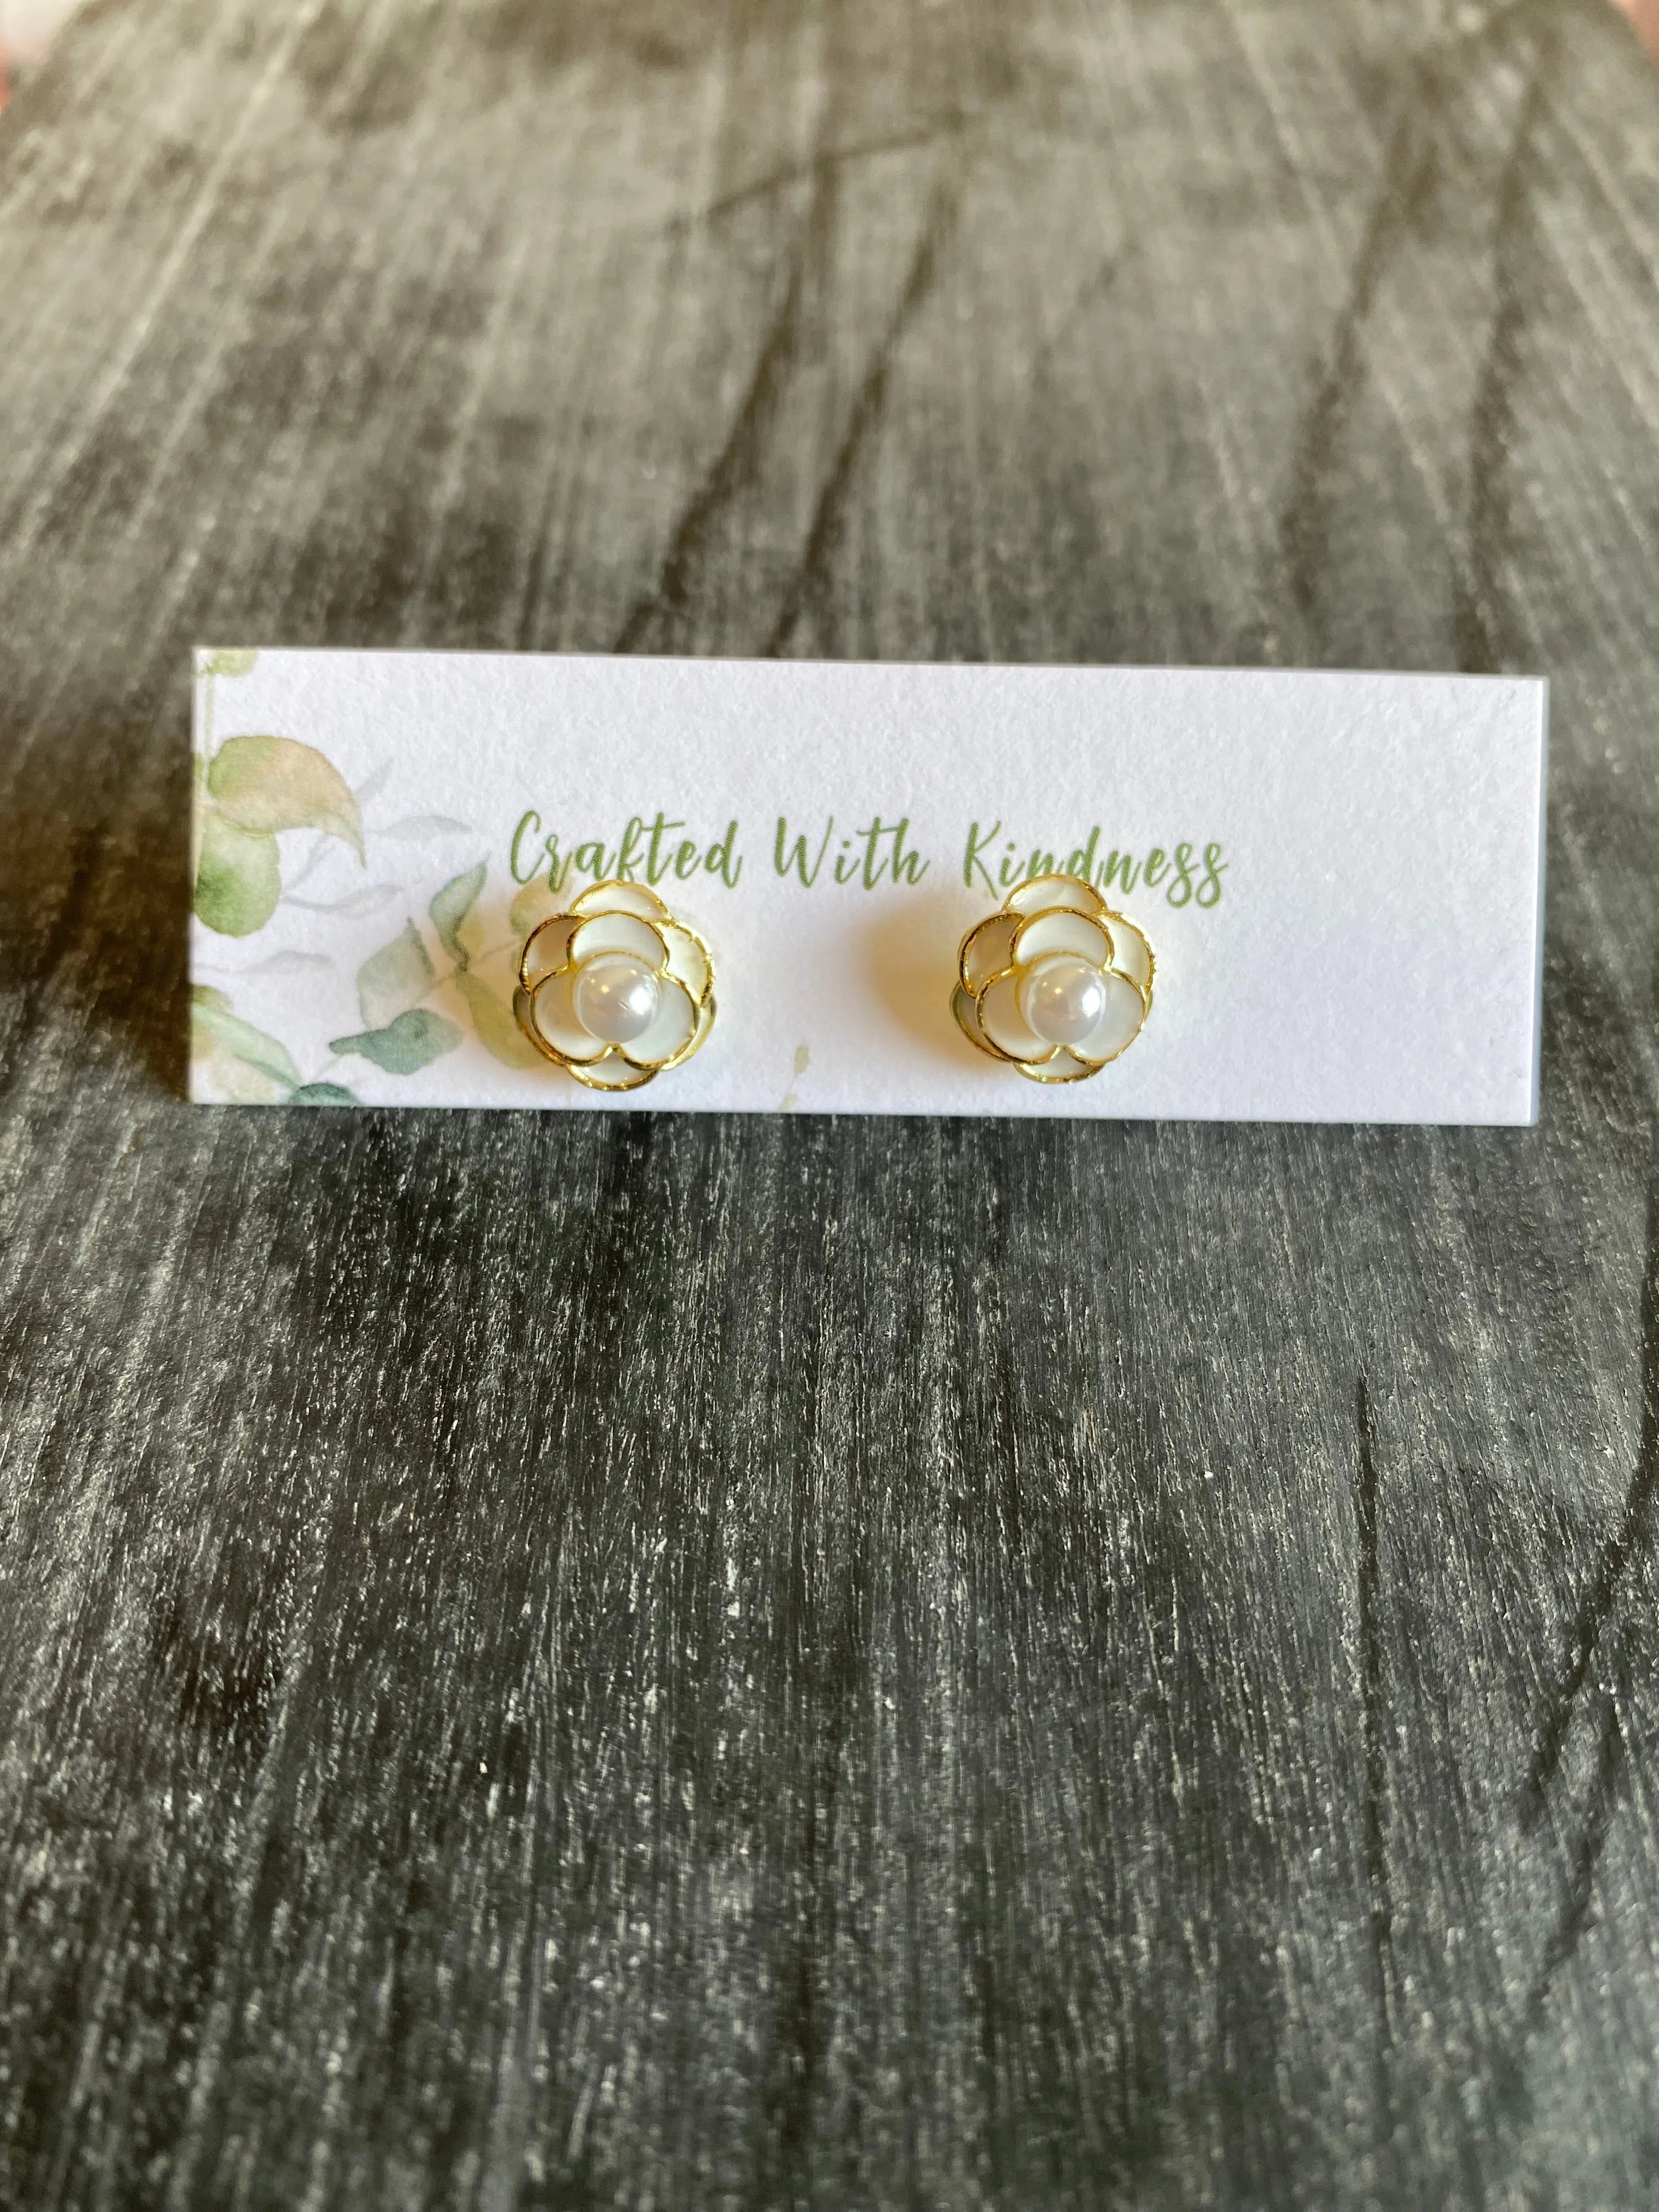 Shop Rose Pearl Studs-Earrings at Ruby Joy Boutique, a Women's Clothing Store in Pickerington, Ohio